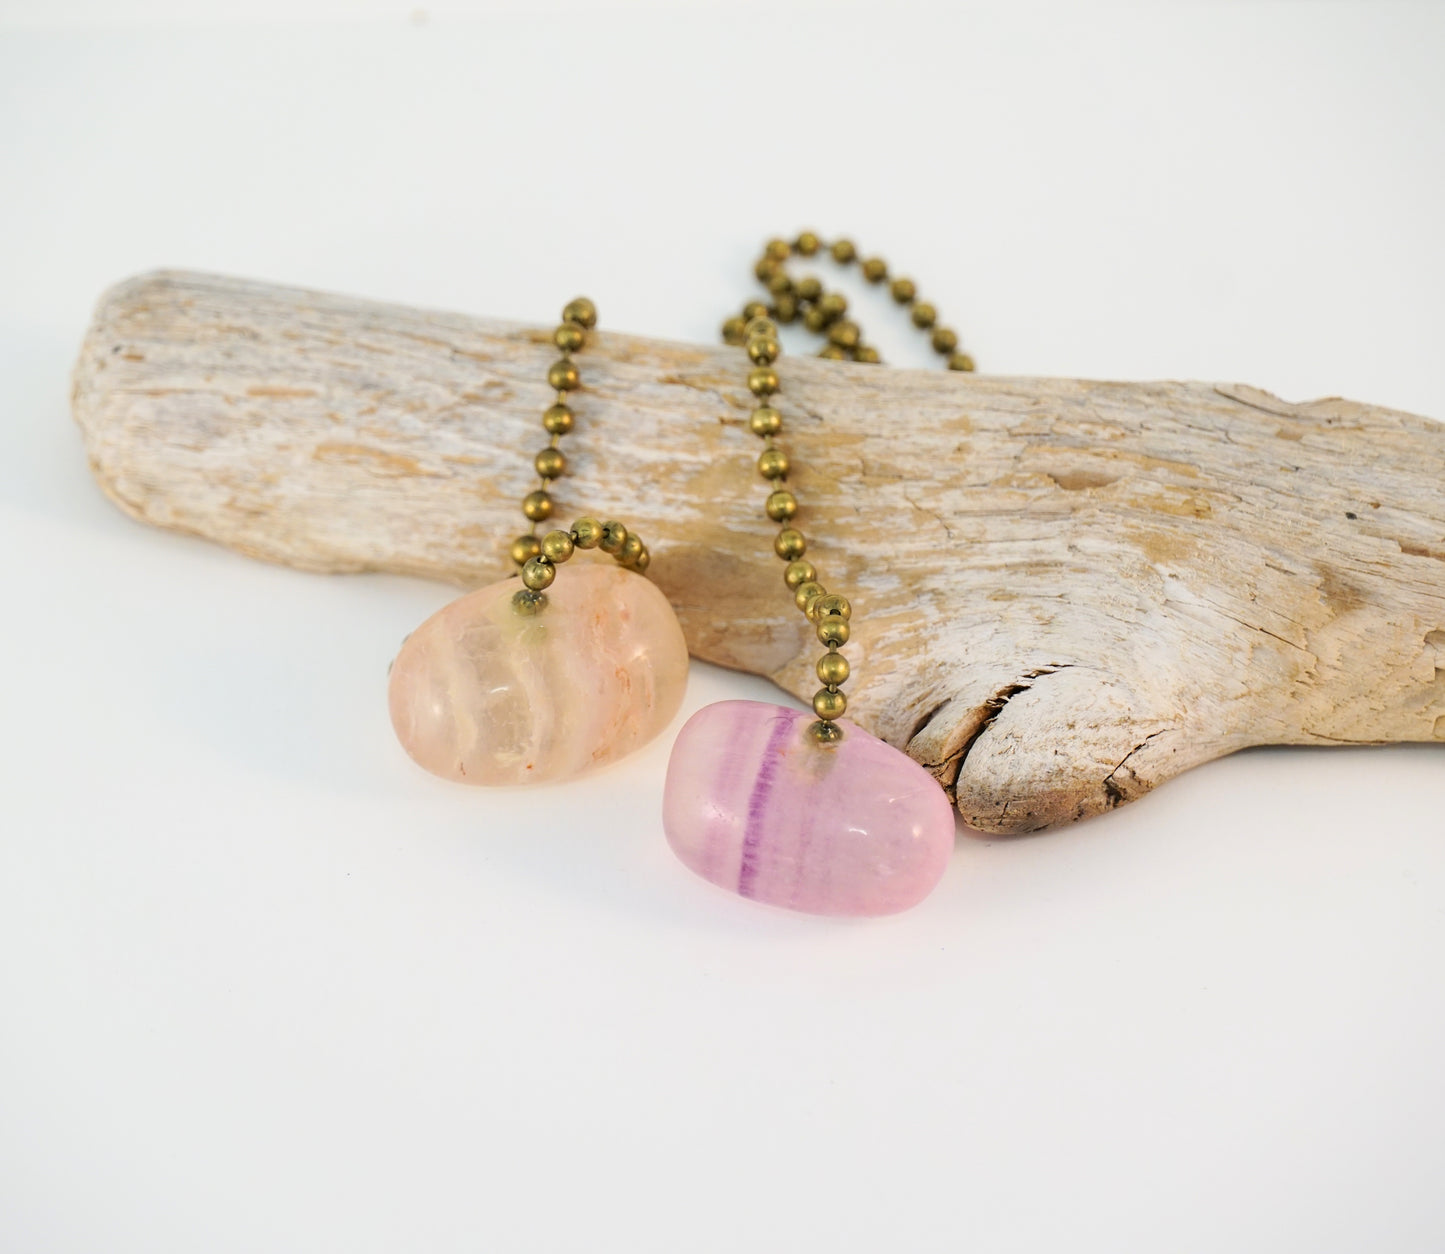 Light and Fan Pulls with Tumbled Fluorite Gemstones